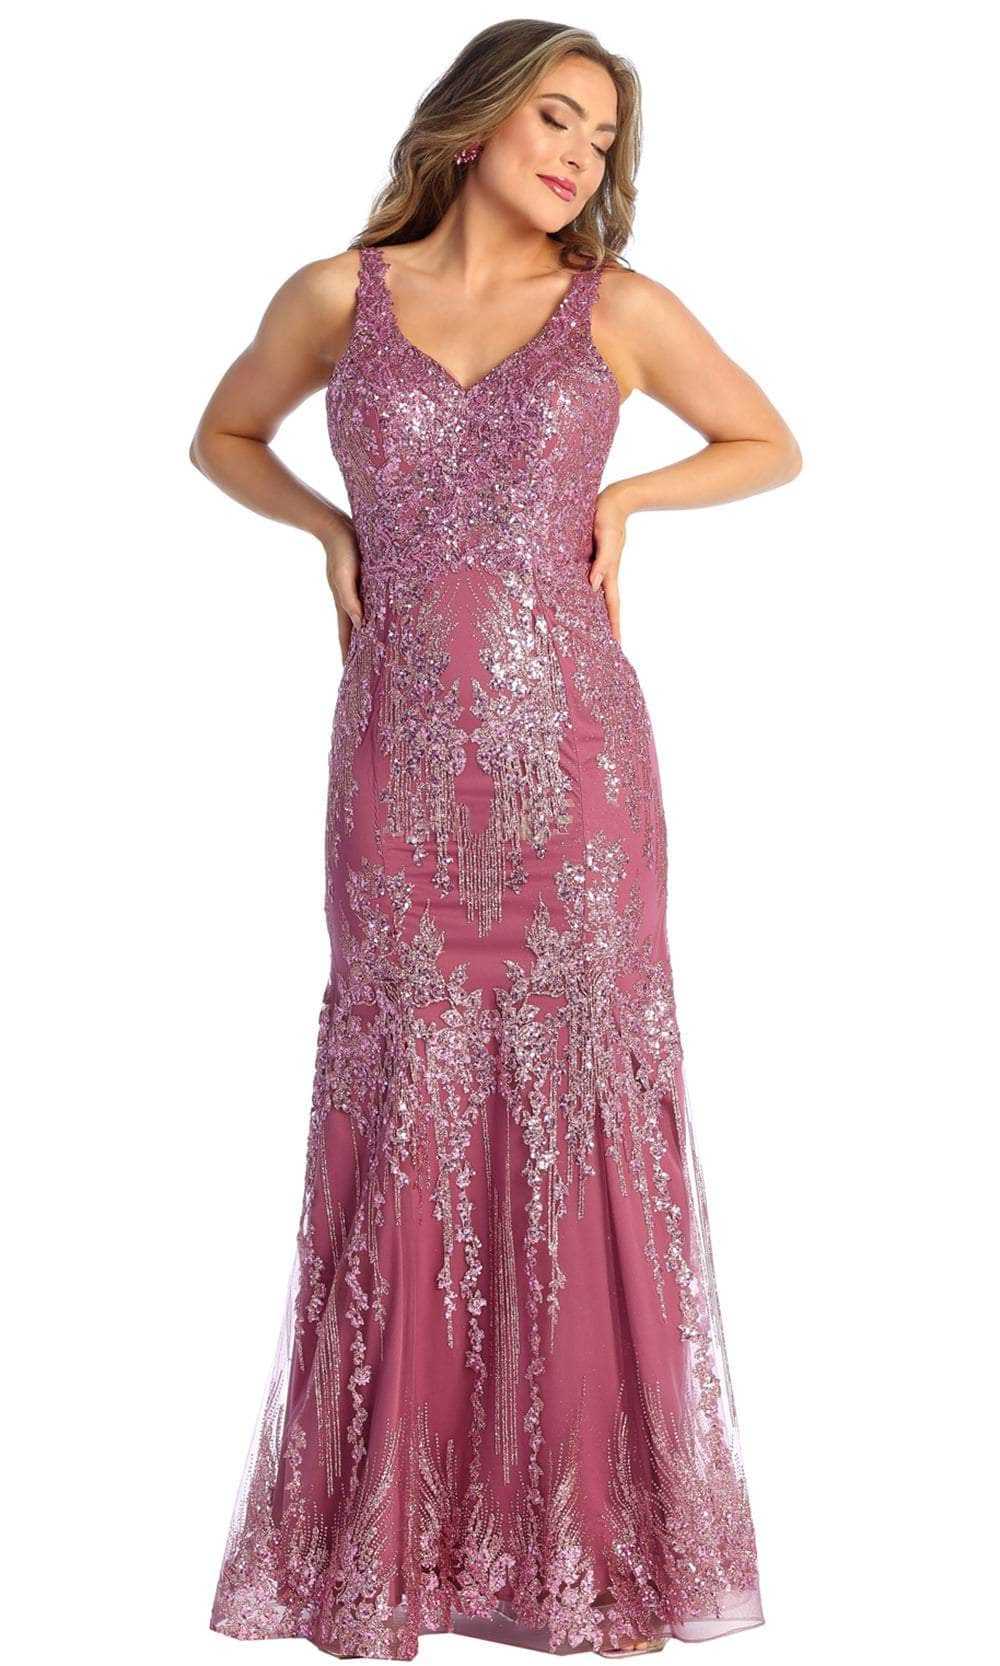 May Queen, May Queen RQ7941 - Sequined Cut-out Evening Dress